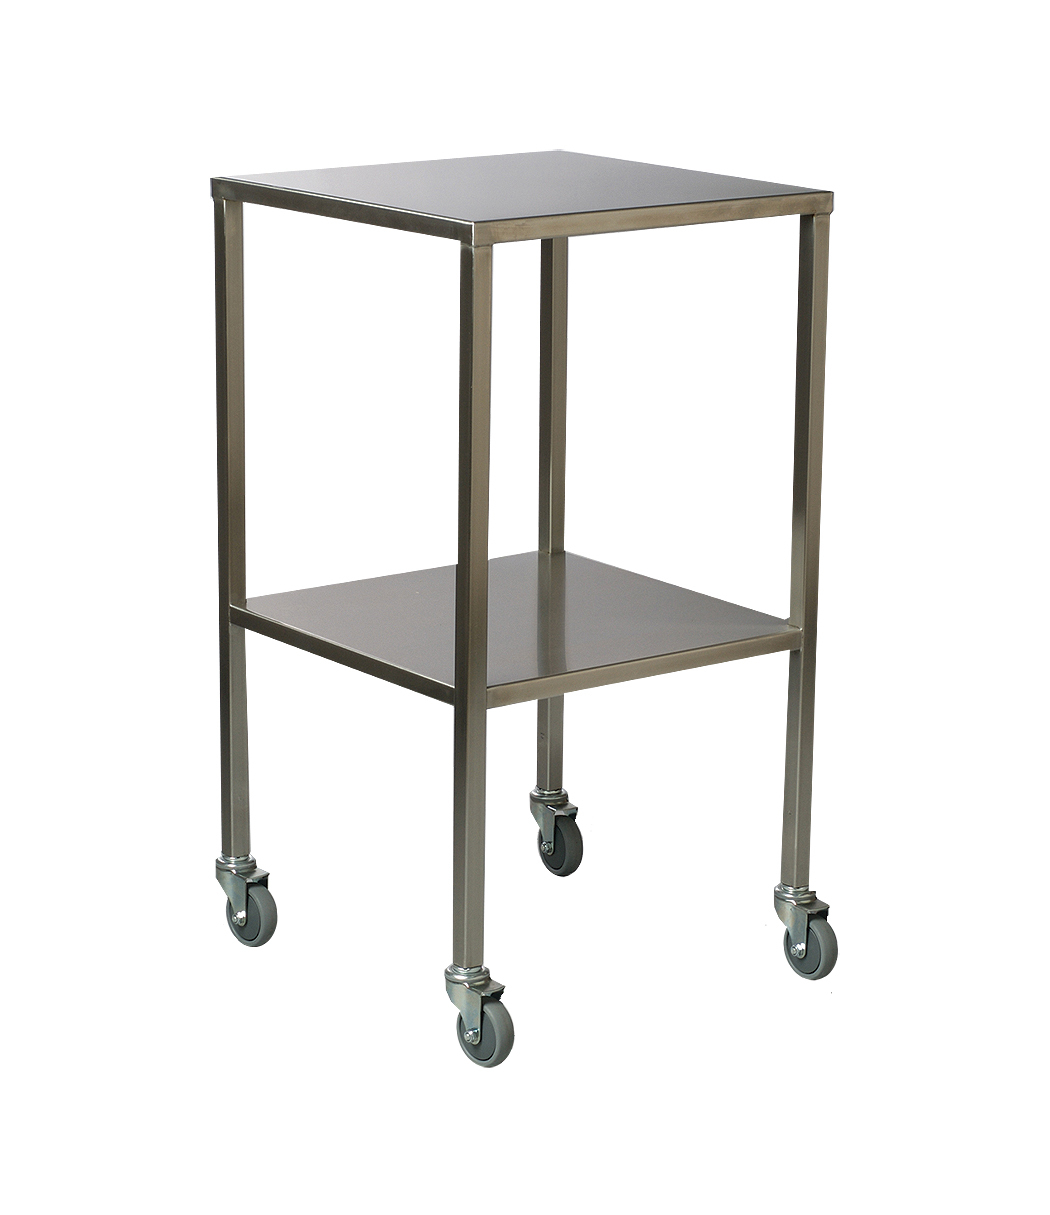 Stainless Steel Dressing Clinicart Trolley Instrument - 2 Tier - 900 x 490mm